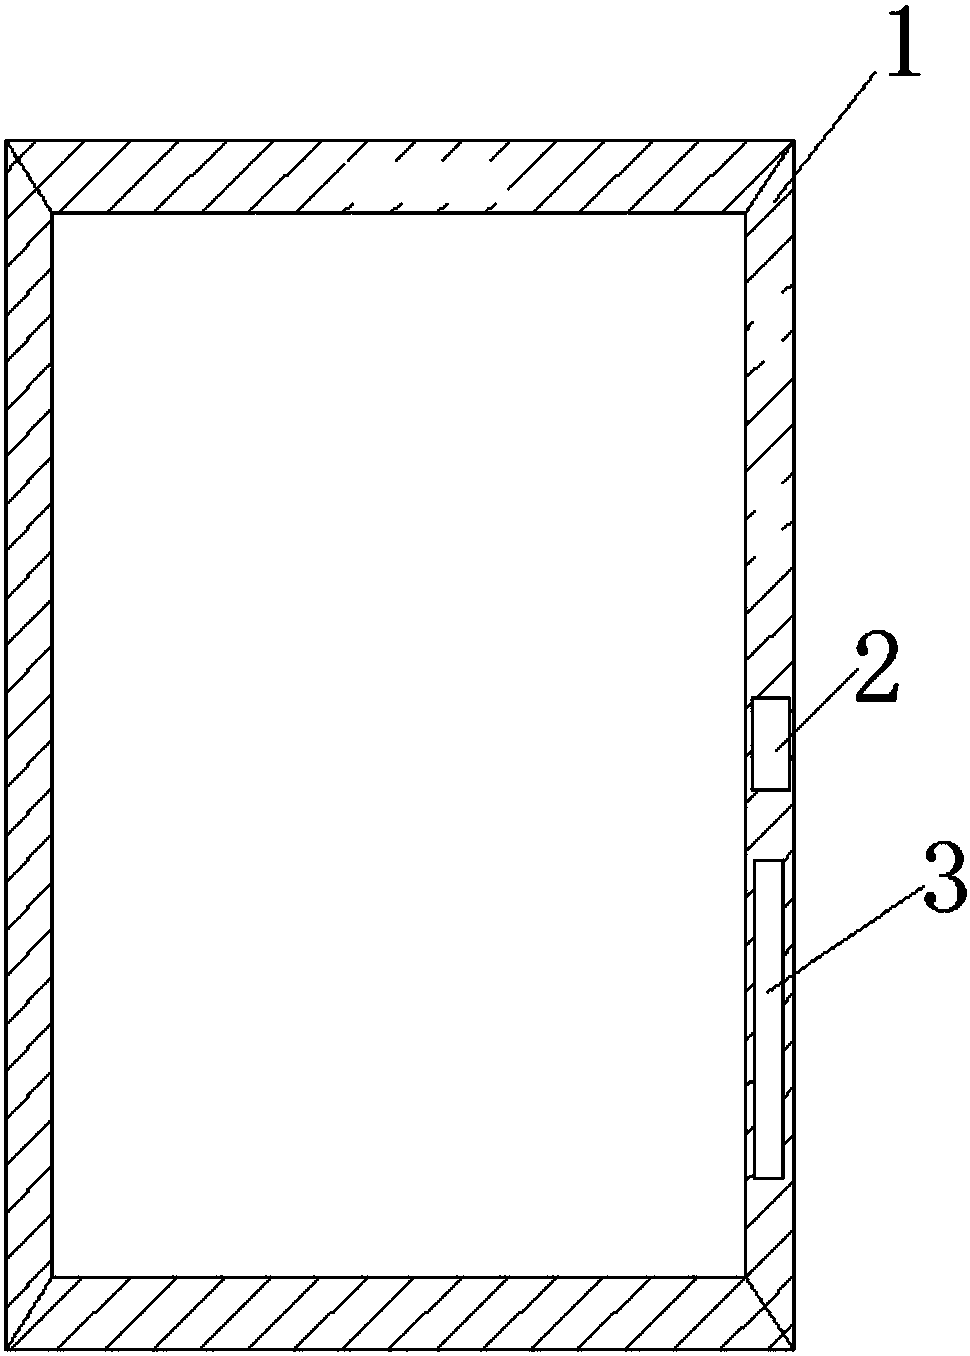 A magnetic levitation door and window control system